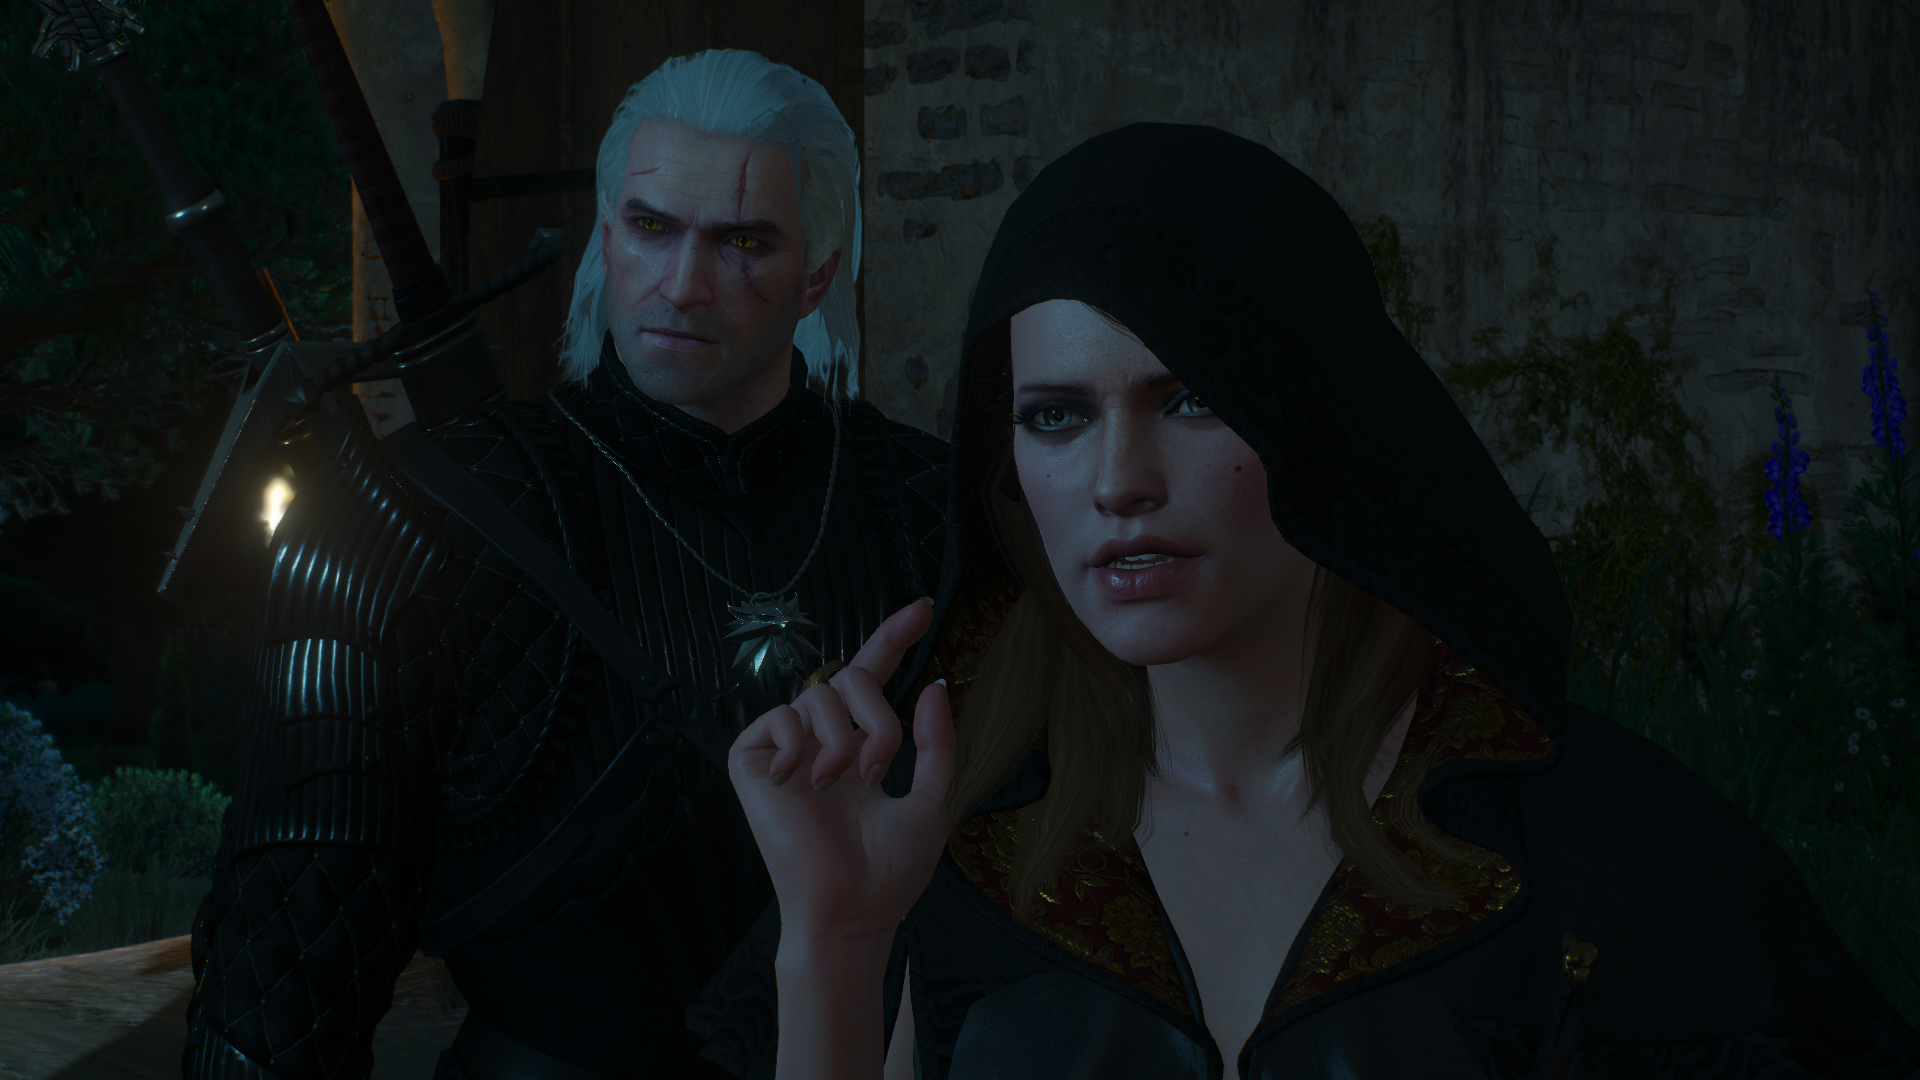 General 1920x1080 The Witcher The Witcher 3: Wild Hunt - Blood and Wine The Witcher 3: Wild Hunt Anna Henrietta video game characters women crown modding Geralt of Rivia